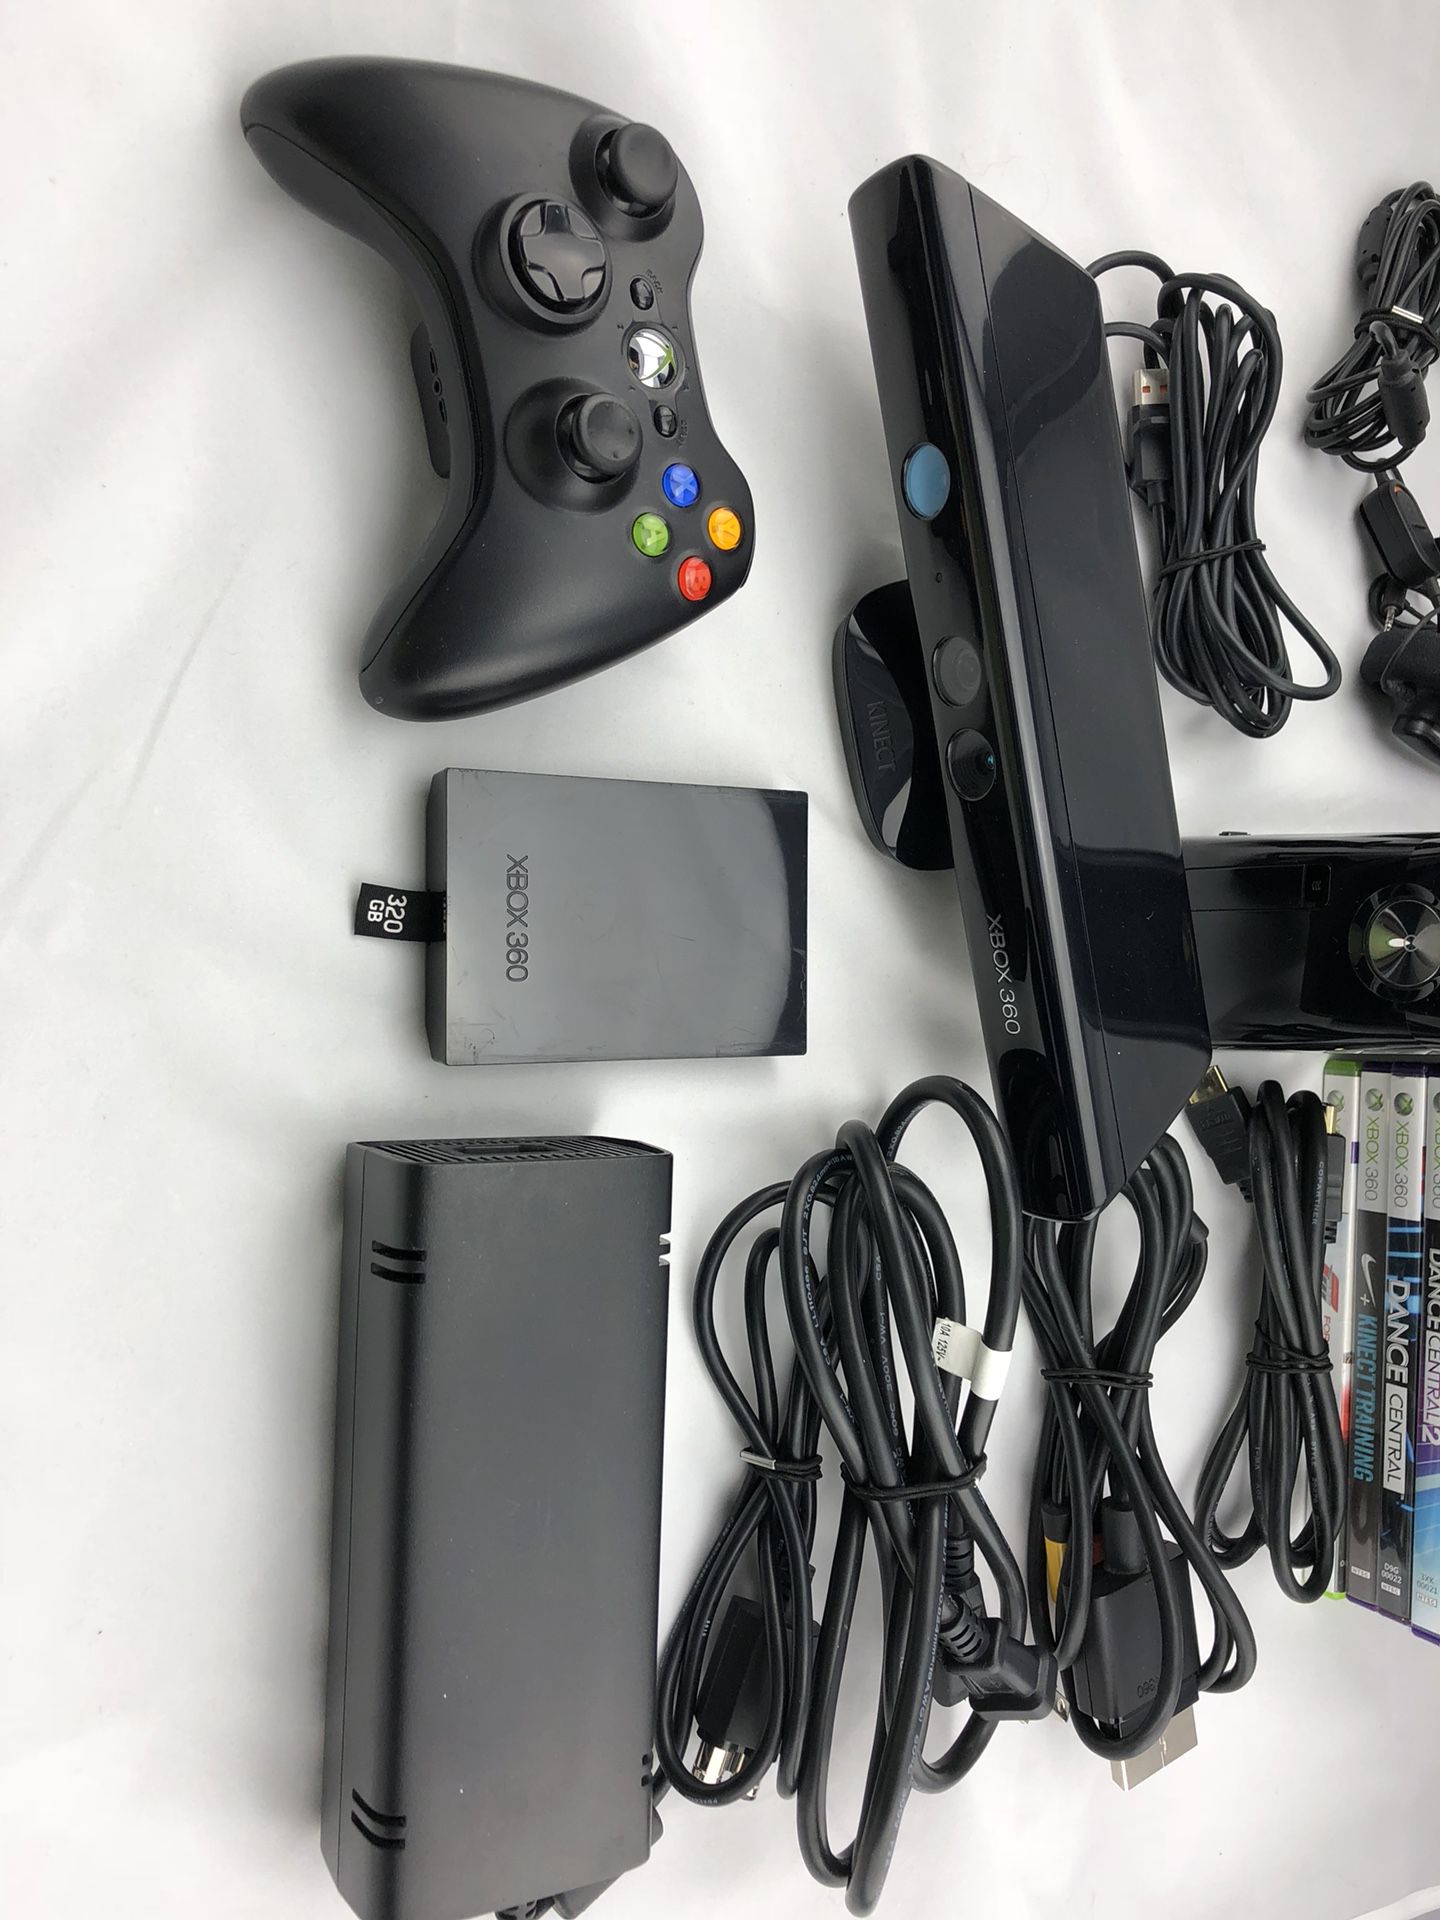 Xbox 360 Super Slim for Sale in Land O' Lakes, FL - OfferUp